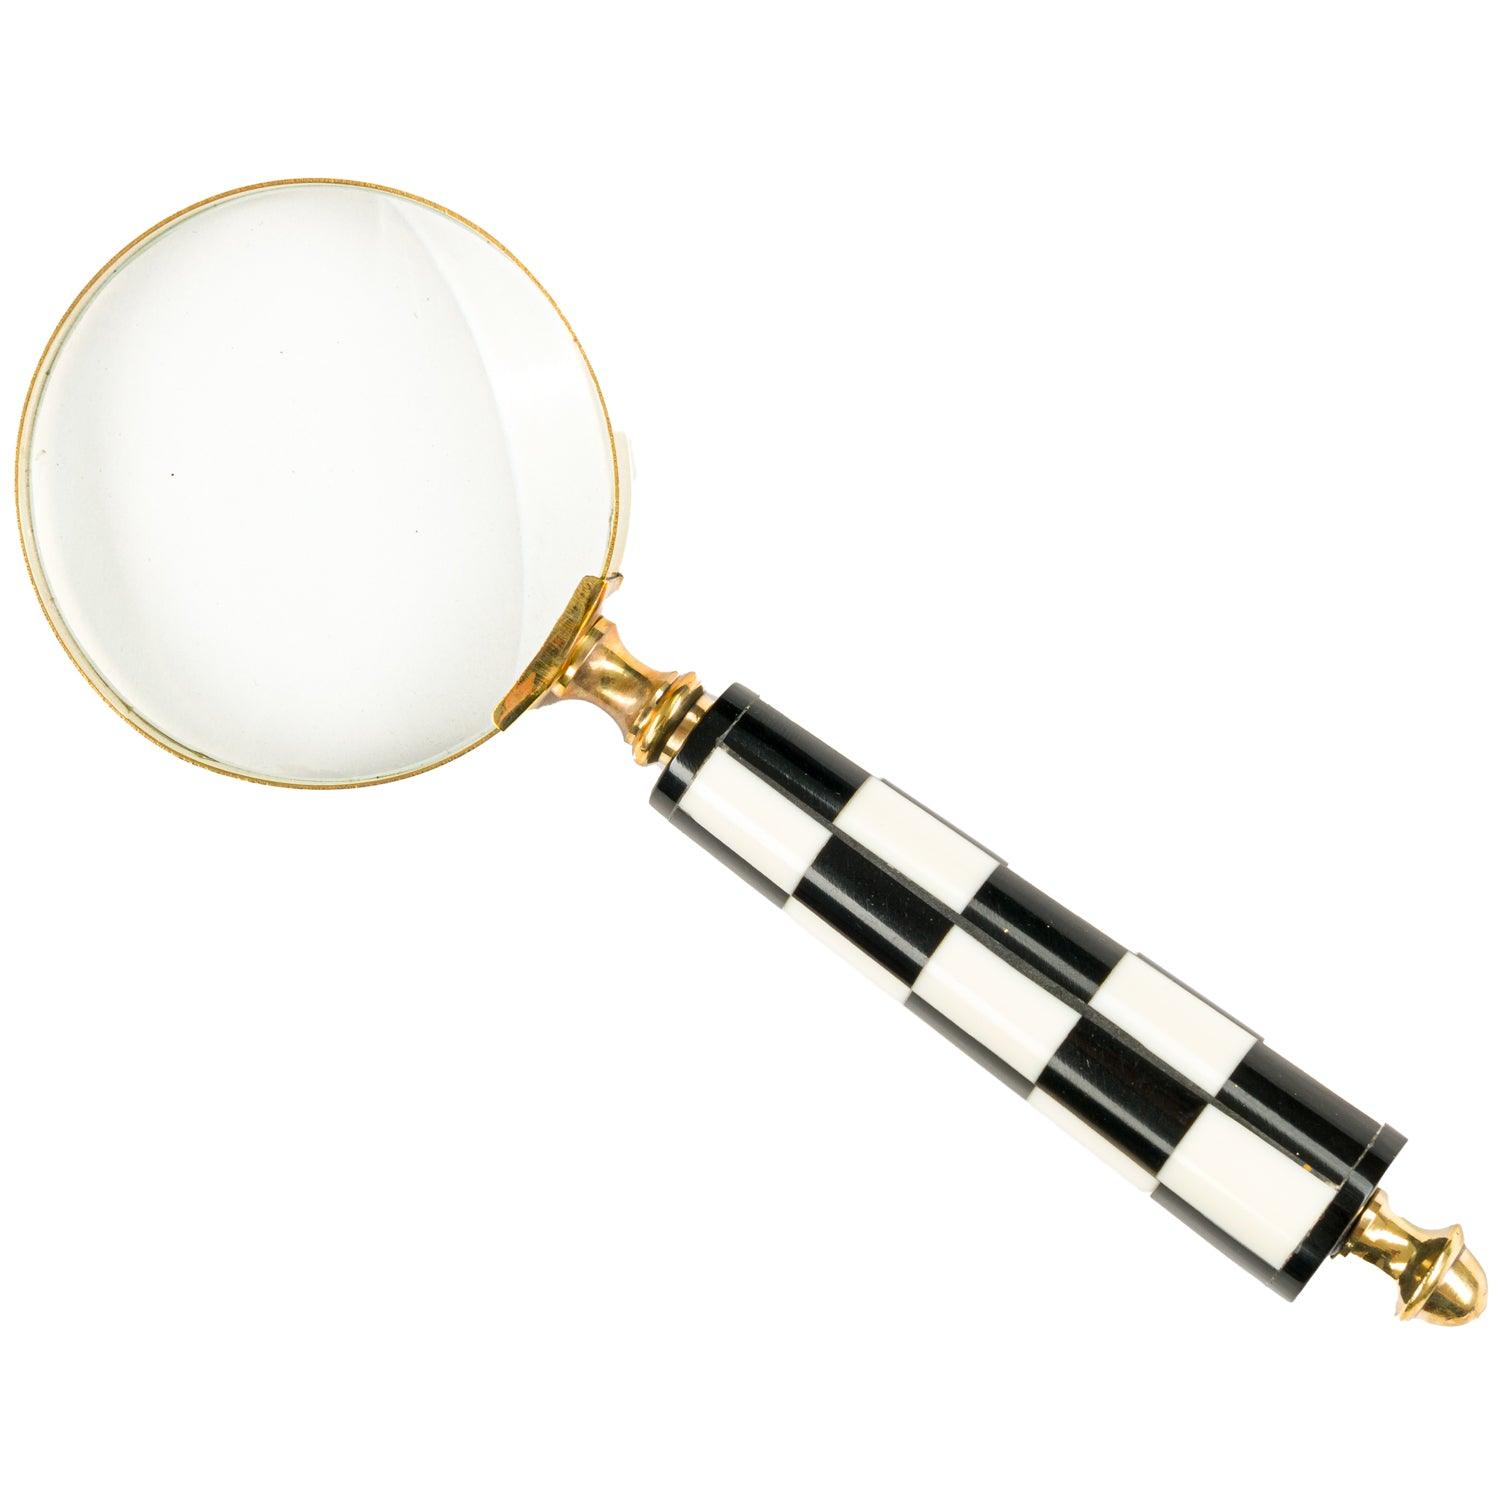 View Checkered Magnifying Glass information